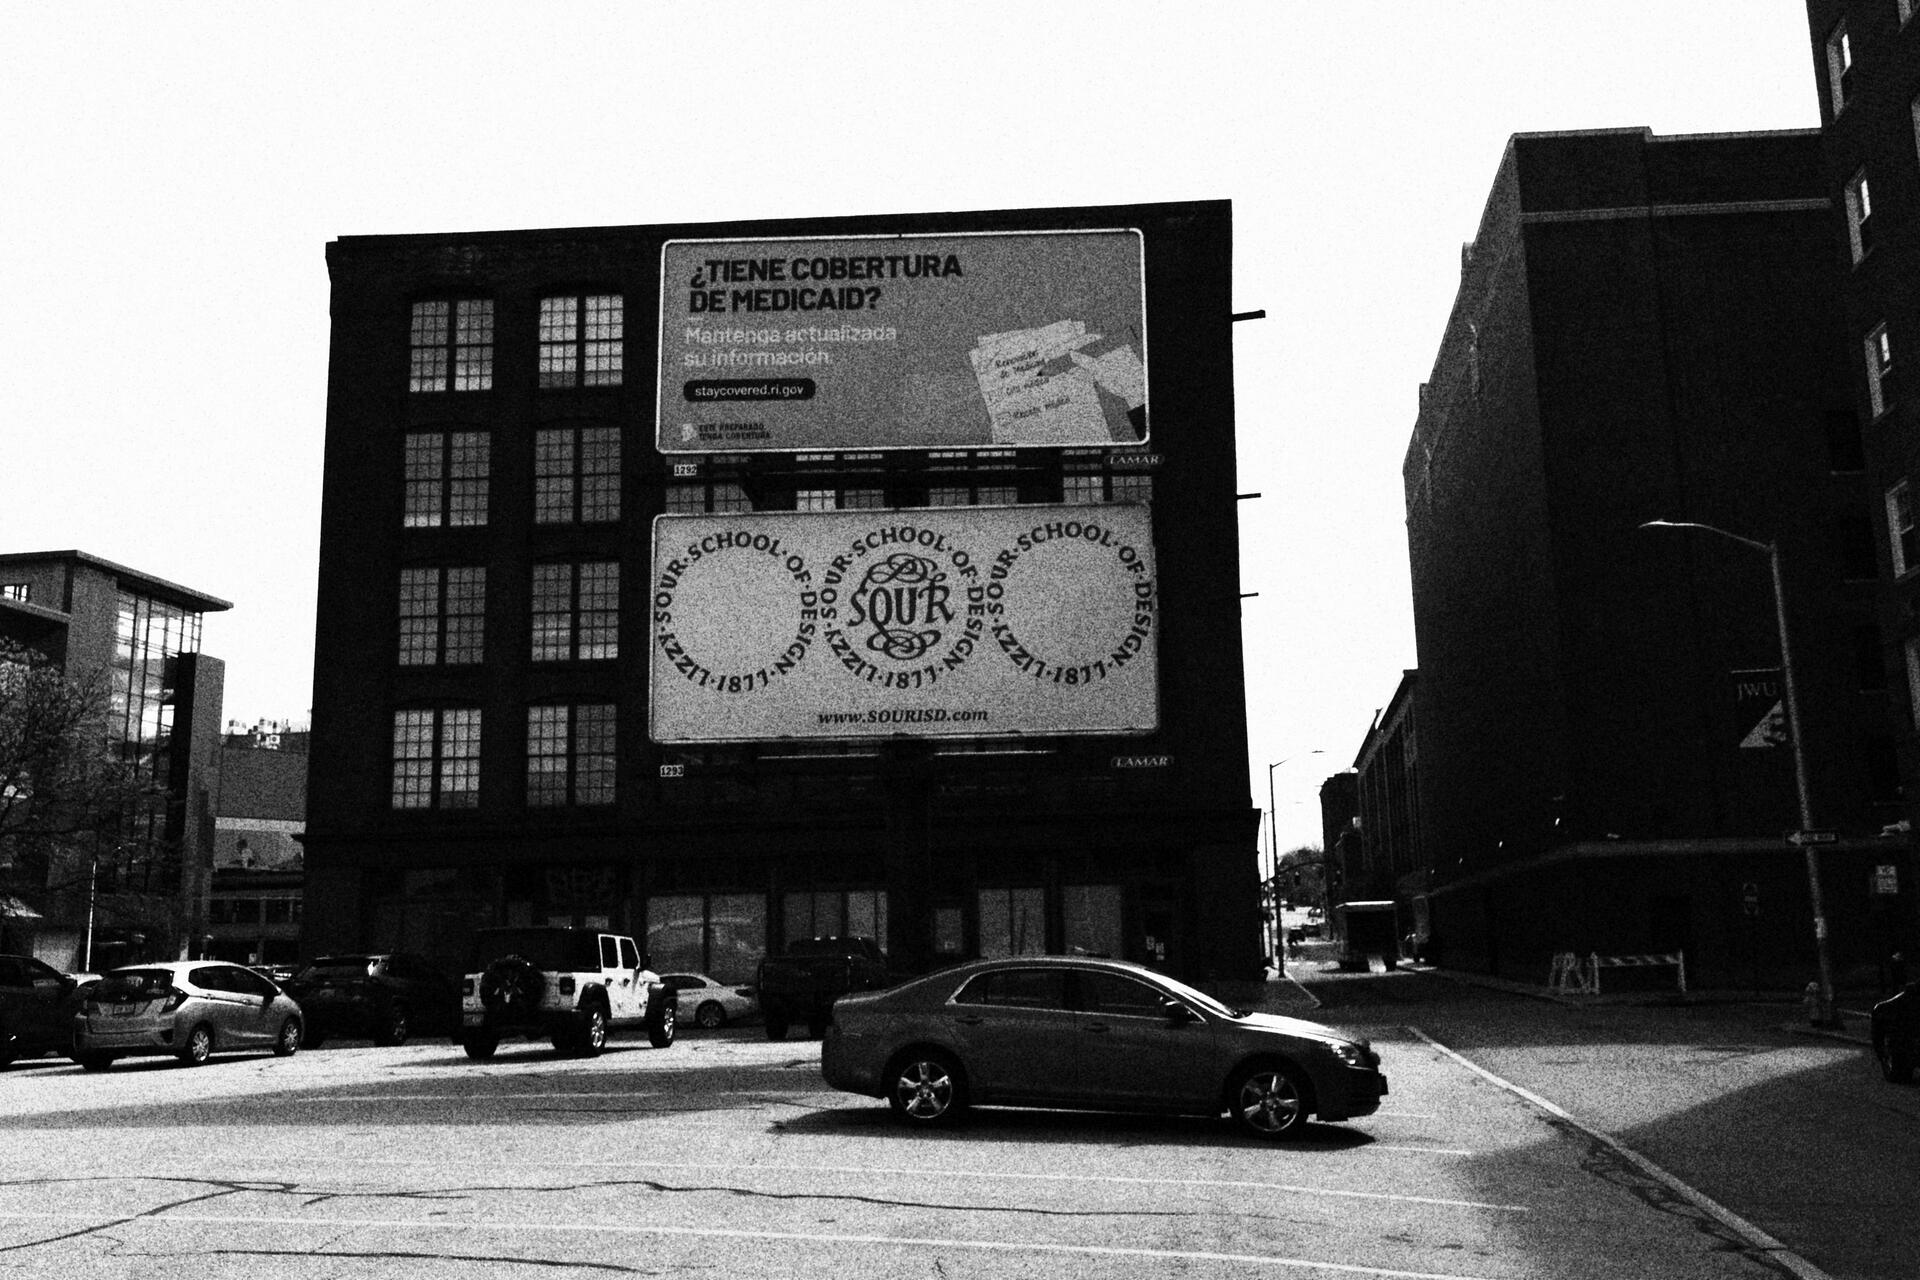 “The Lizzy Sour School of Design Billboard Project” (2024), advertisement posting will be displayed until early June. Located on the corner of Page & Pine Street in Downtown Providence. Visit the website, www.SOURISD.com to learn more!